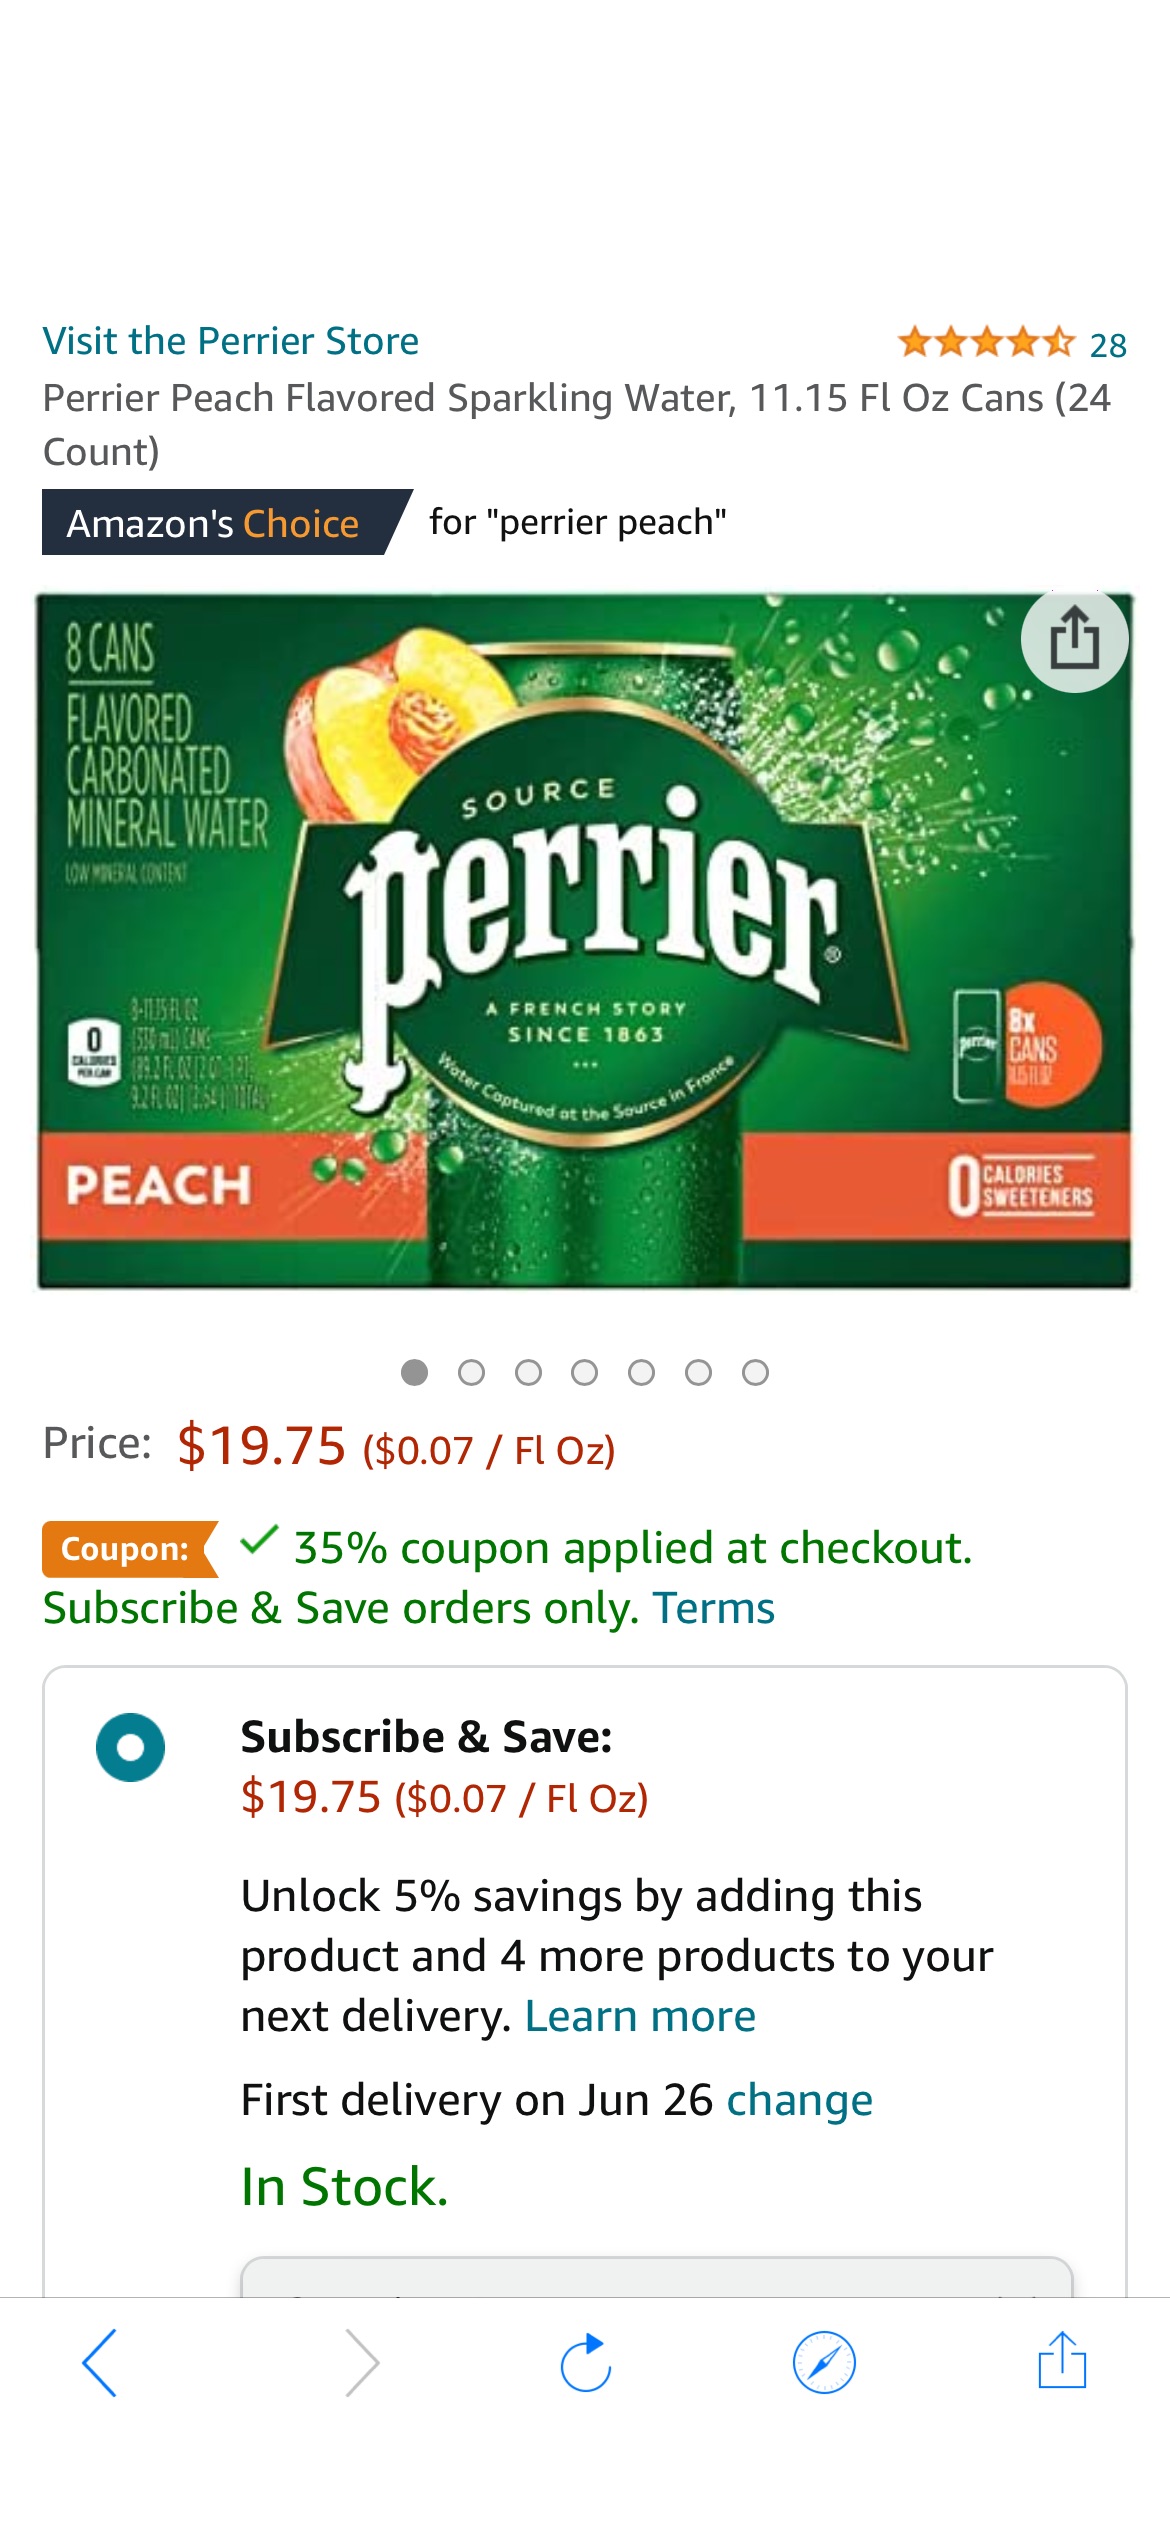 Amazon.com: Perrier Peach Flavored Sparkling Water, 11.15 Fl Oz Cans (24 Count) : Grocery & Gourmet Food 气泡水35%off